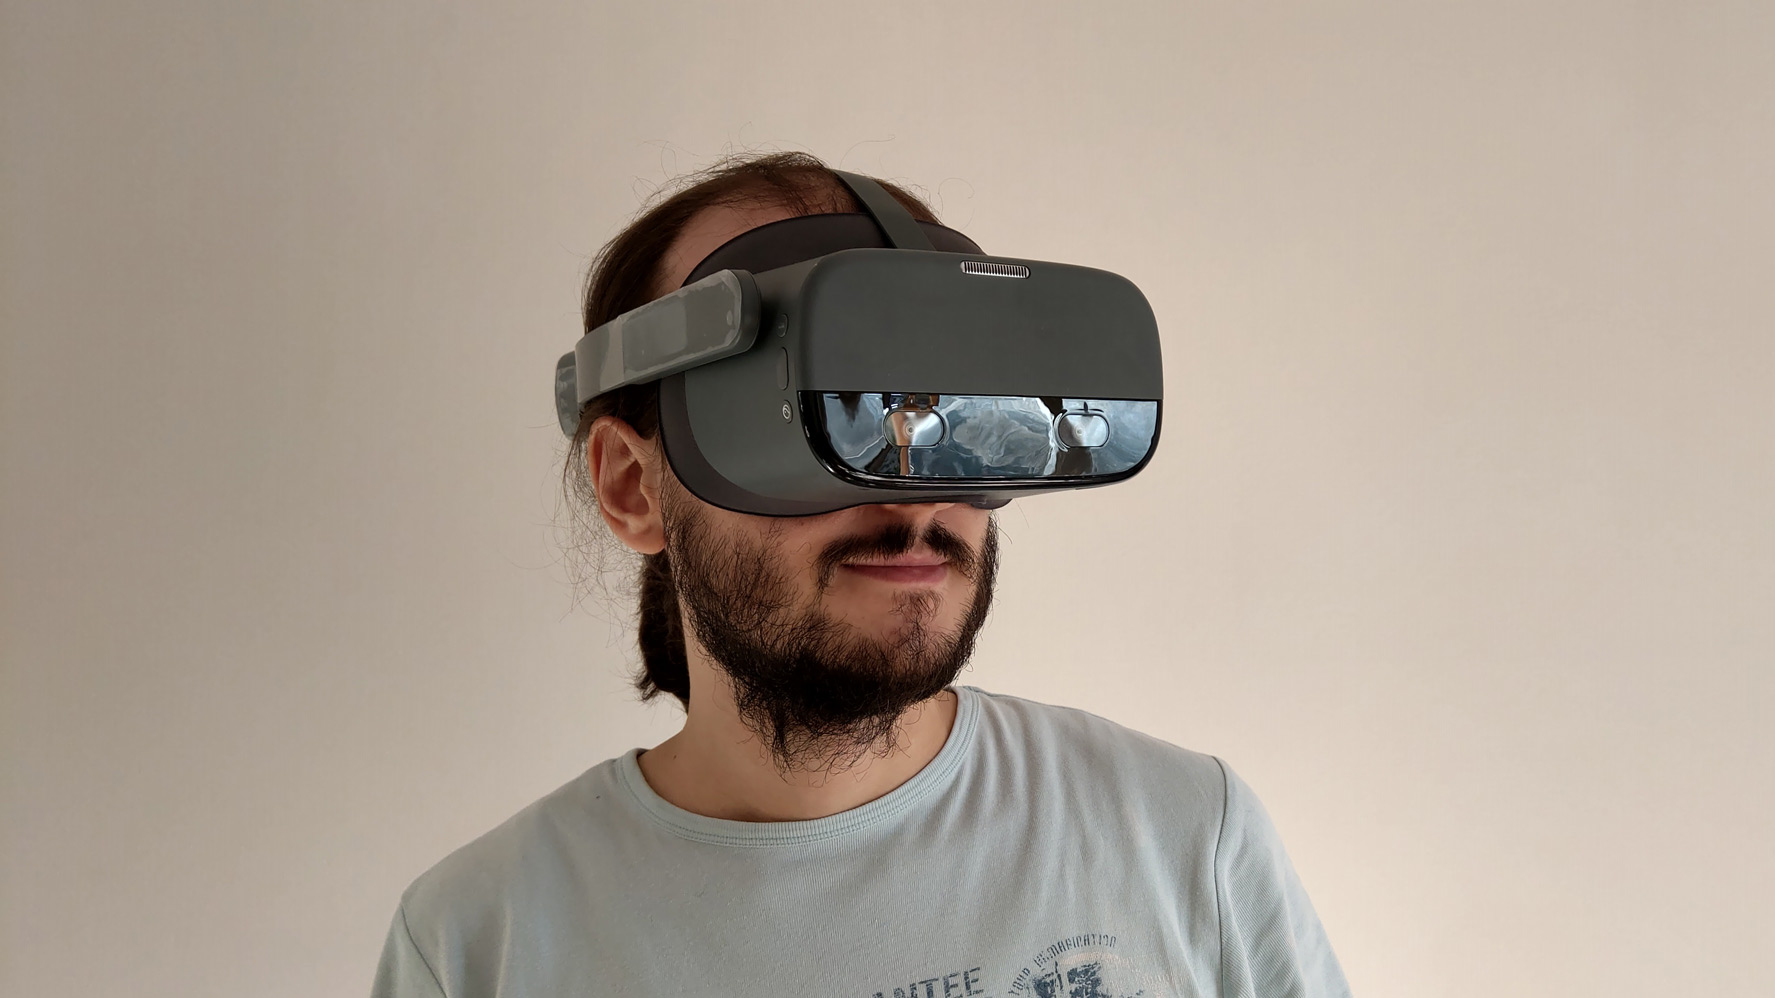 Pico Neo 2 Eye review: the new best enterprise standalone headset